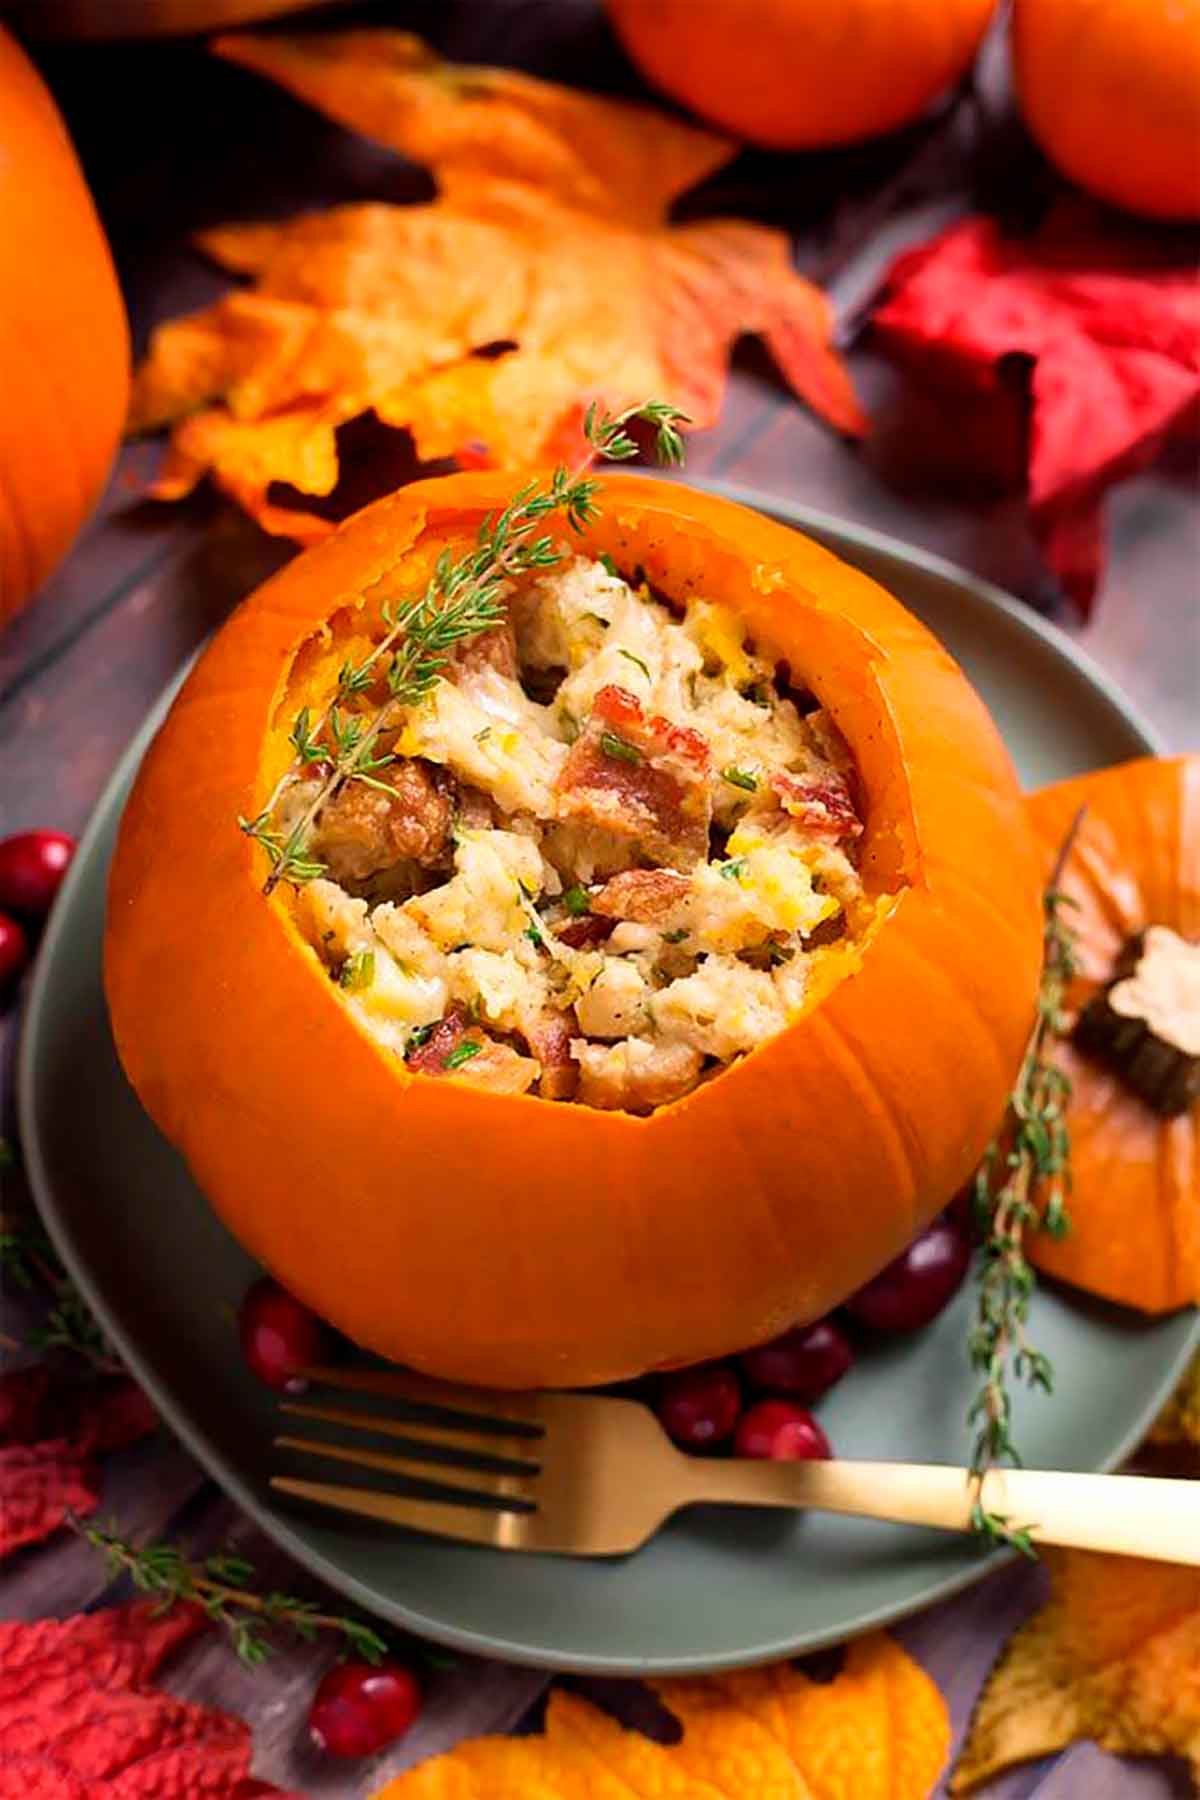 A pumpkin filled with stuffing on a plate, surrounded by autumn leaves.